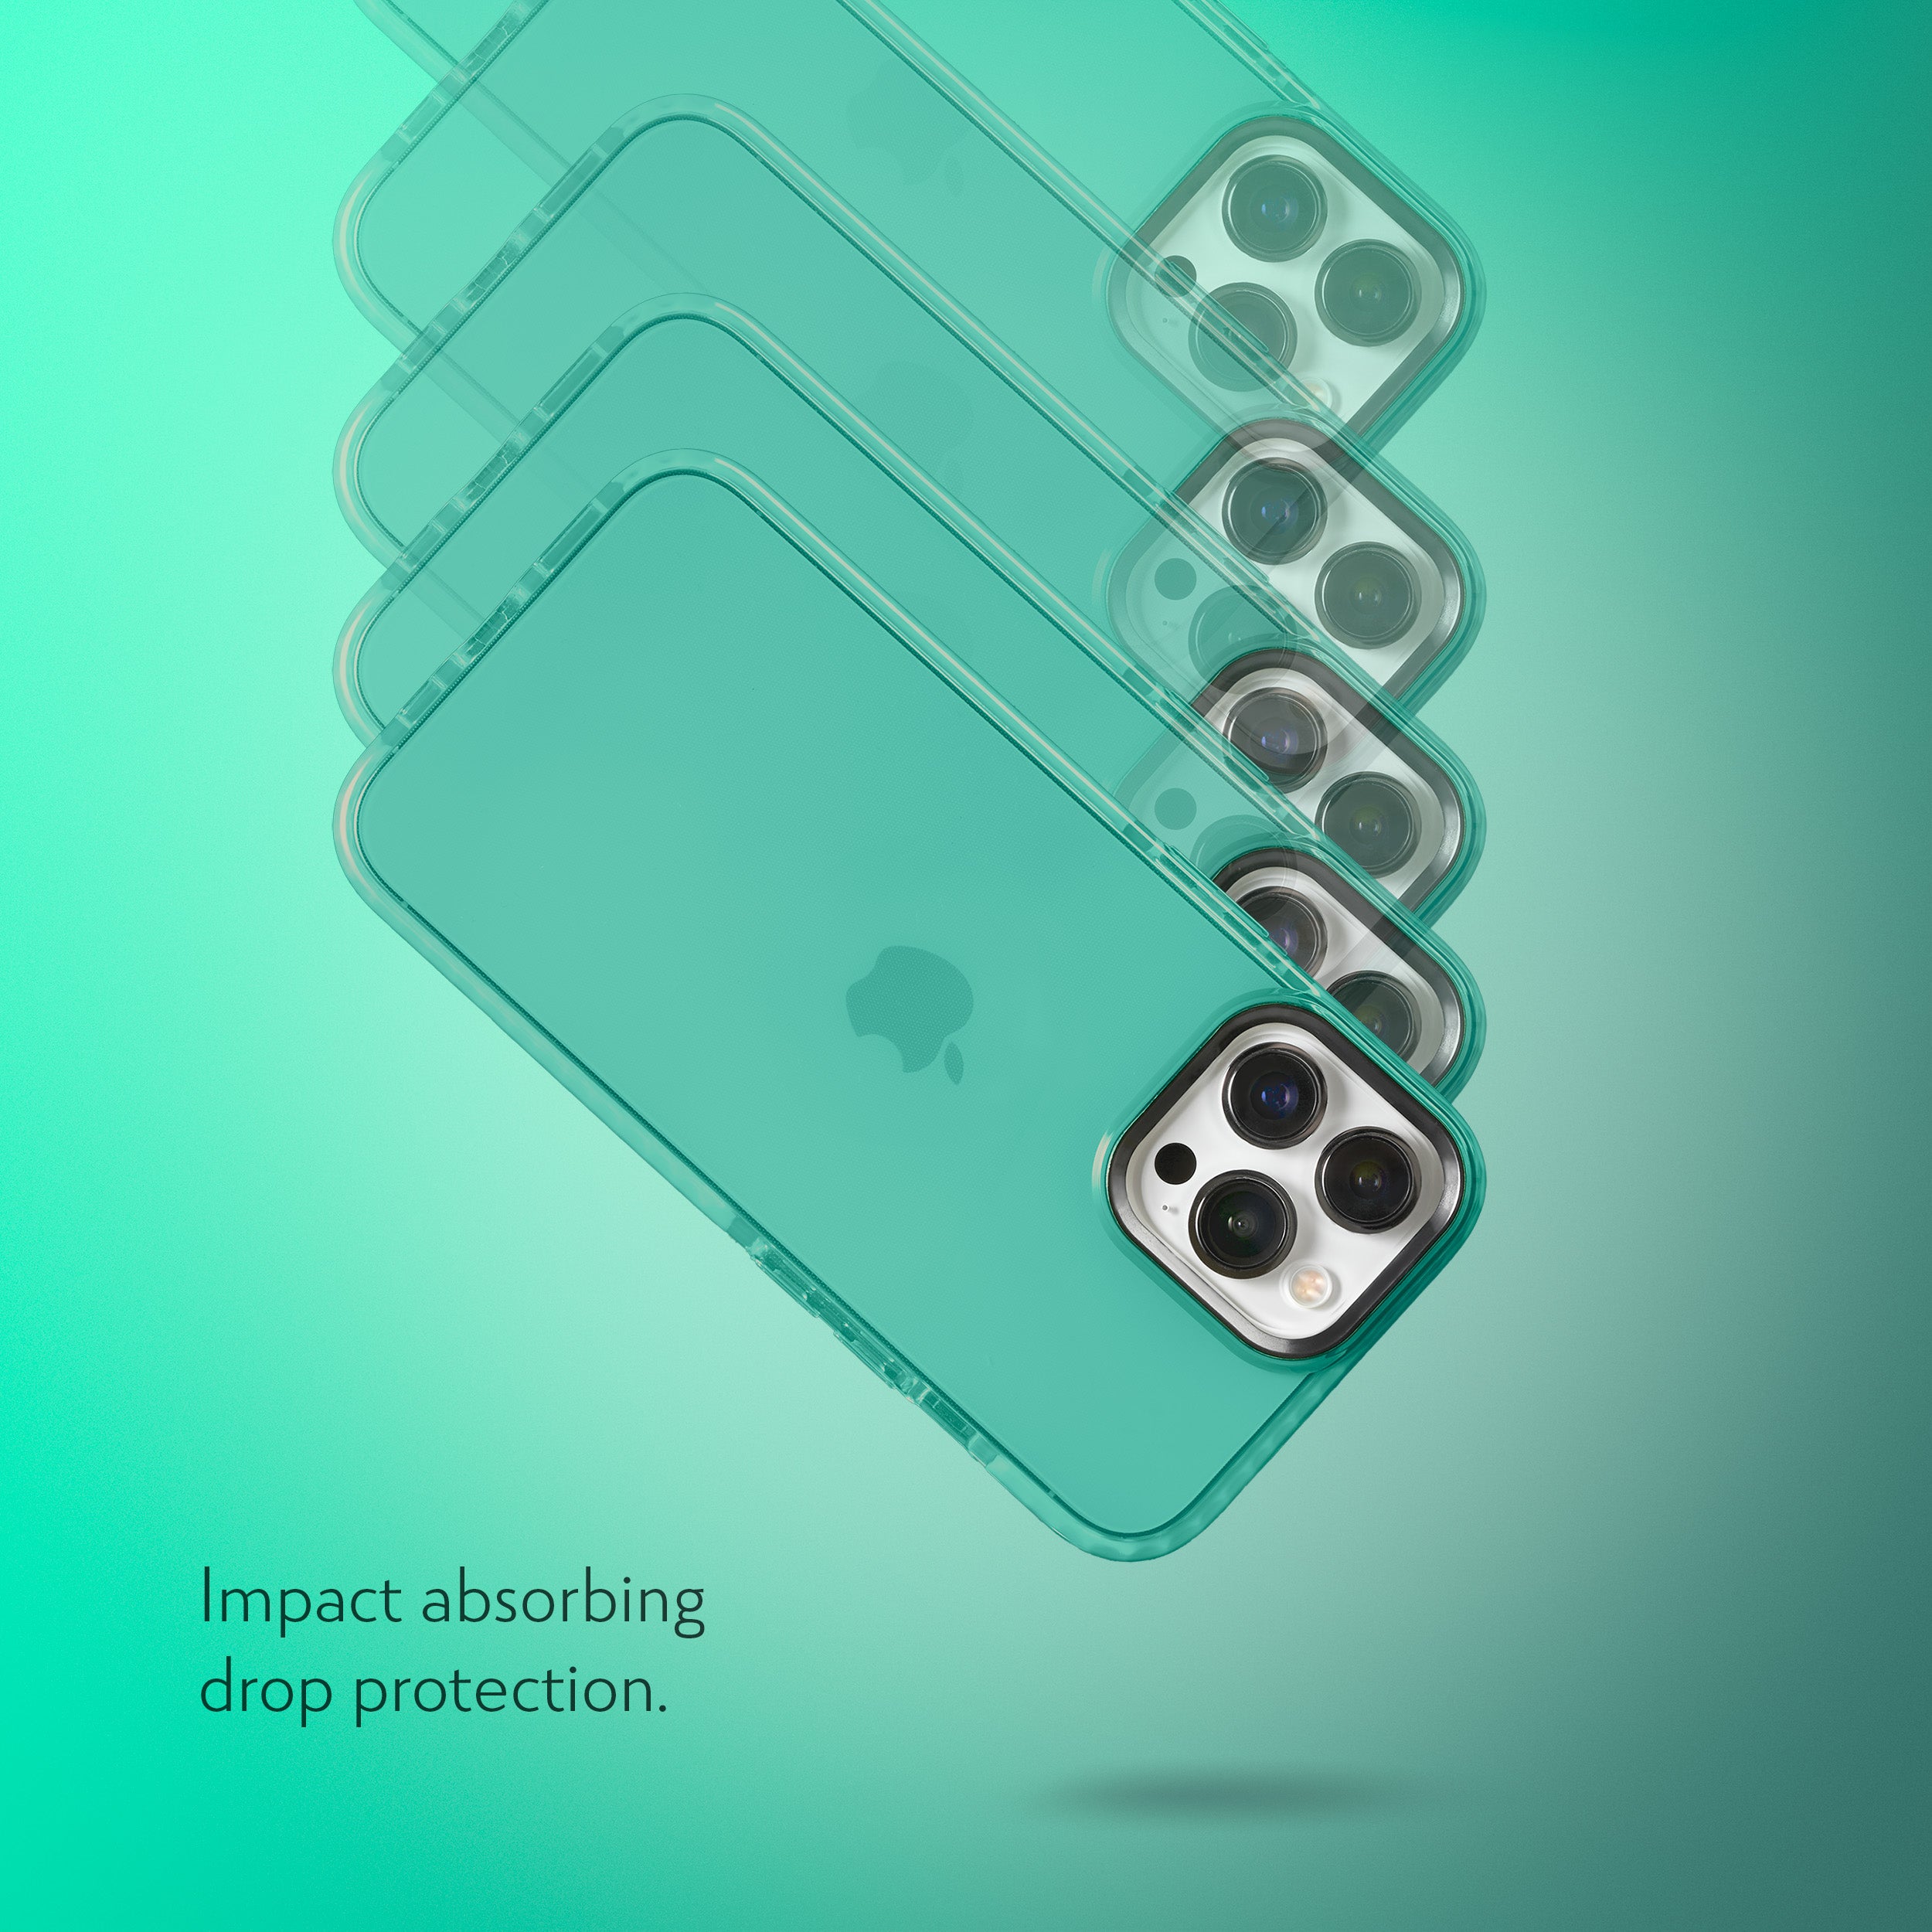 Barrier Case for iPhone 13 Pro Max - Polished Turquoise Blue